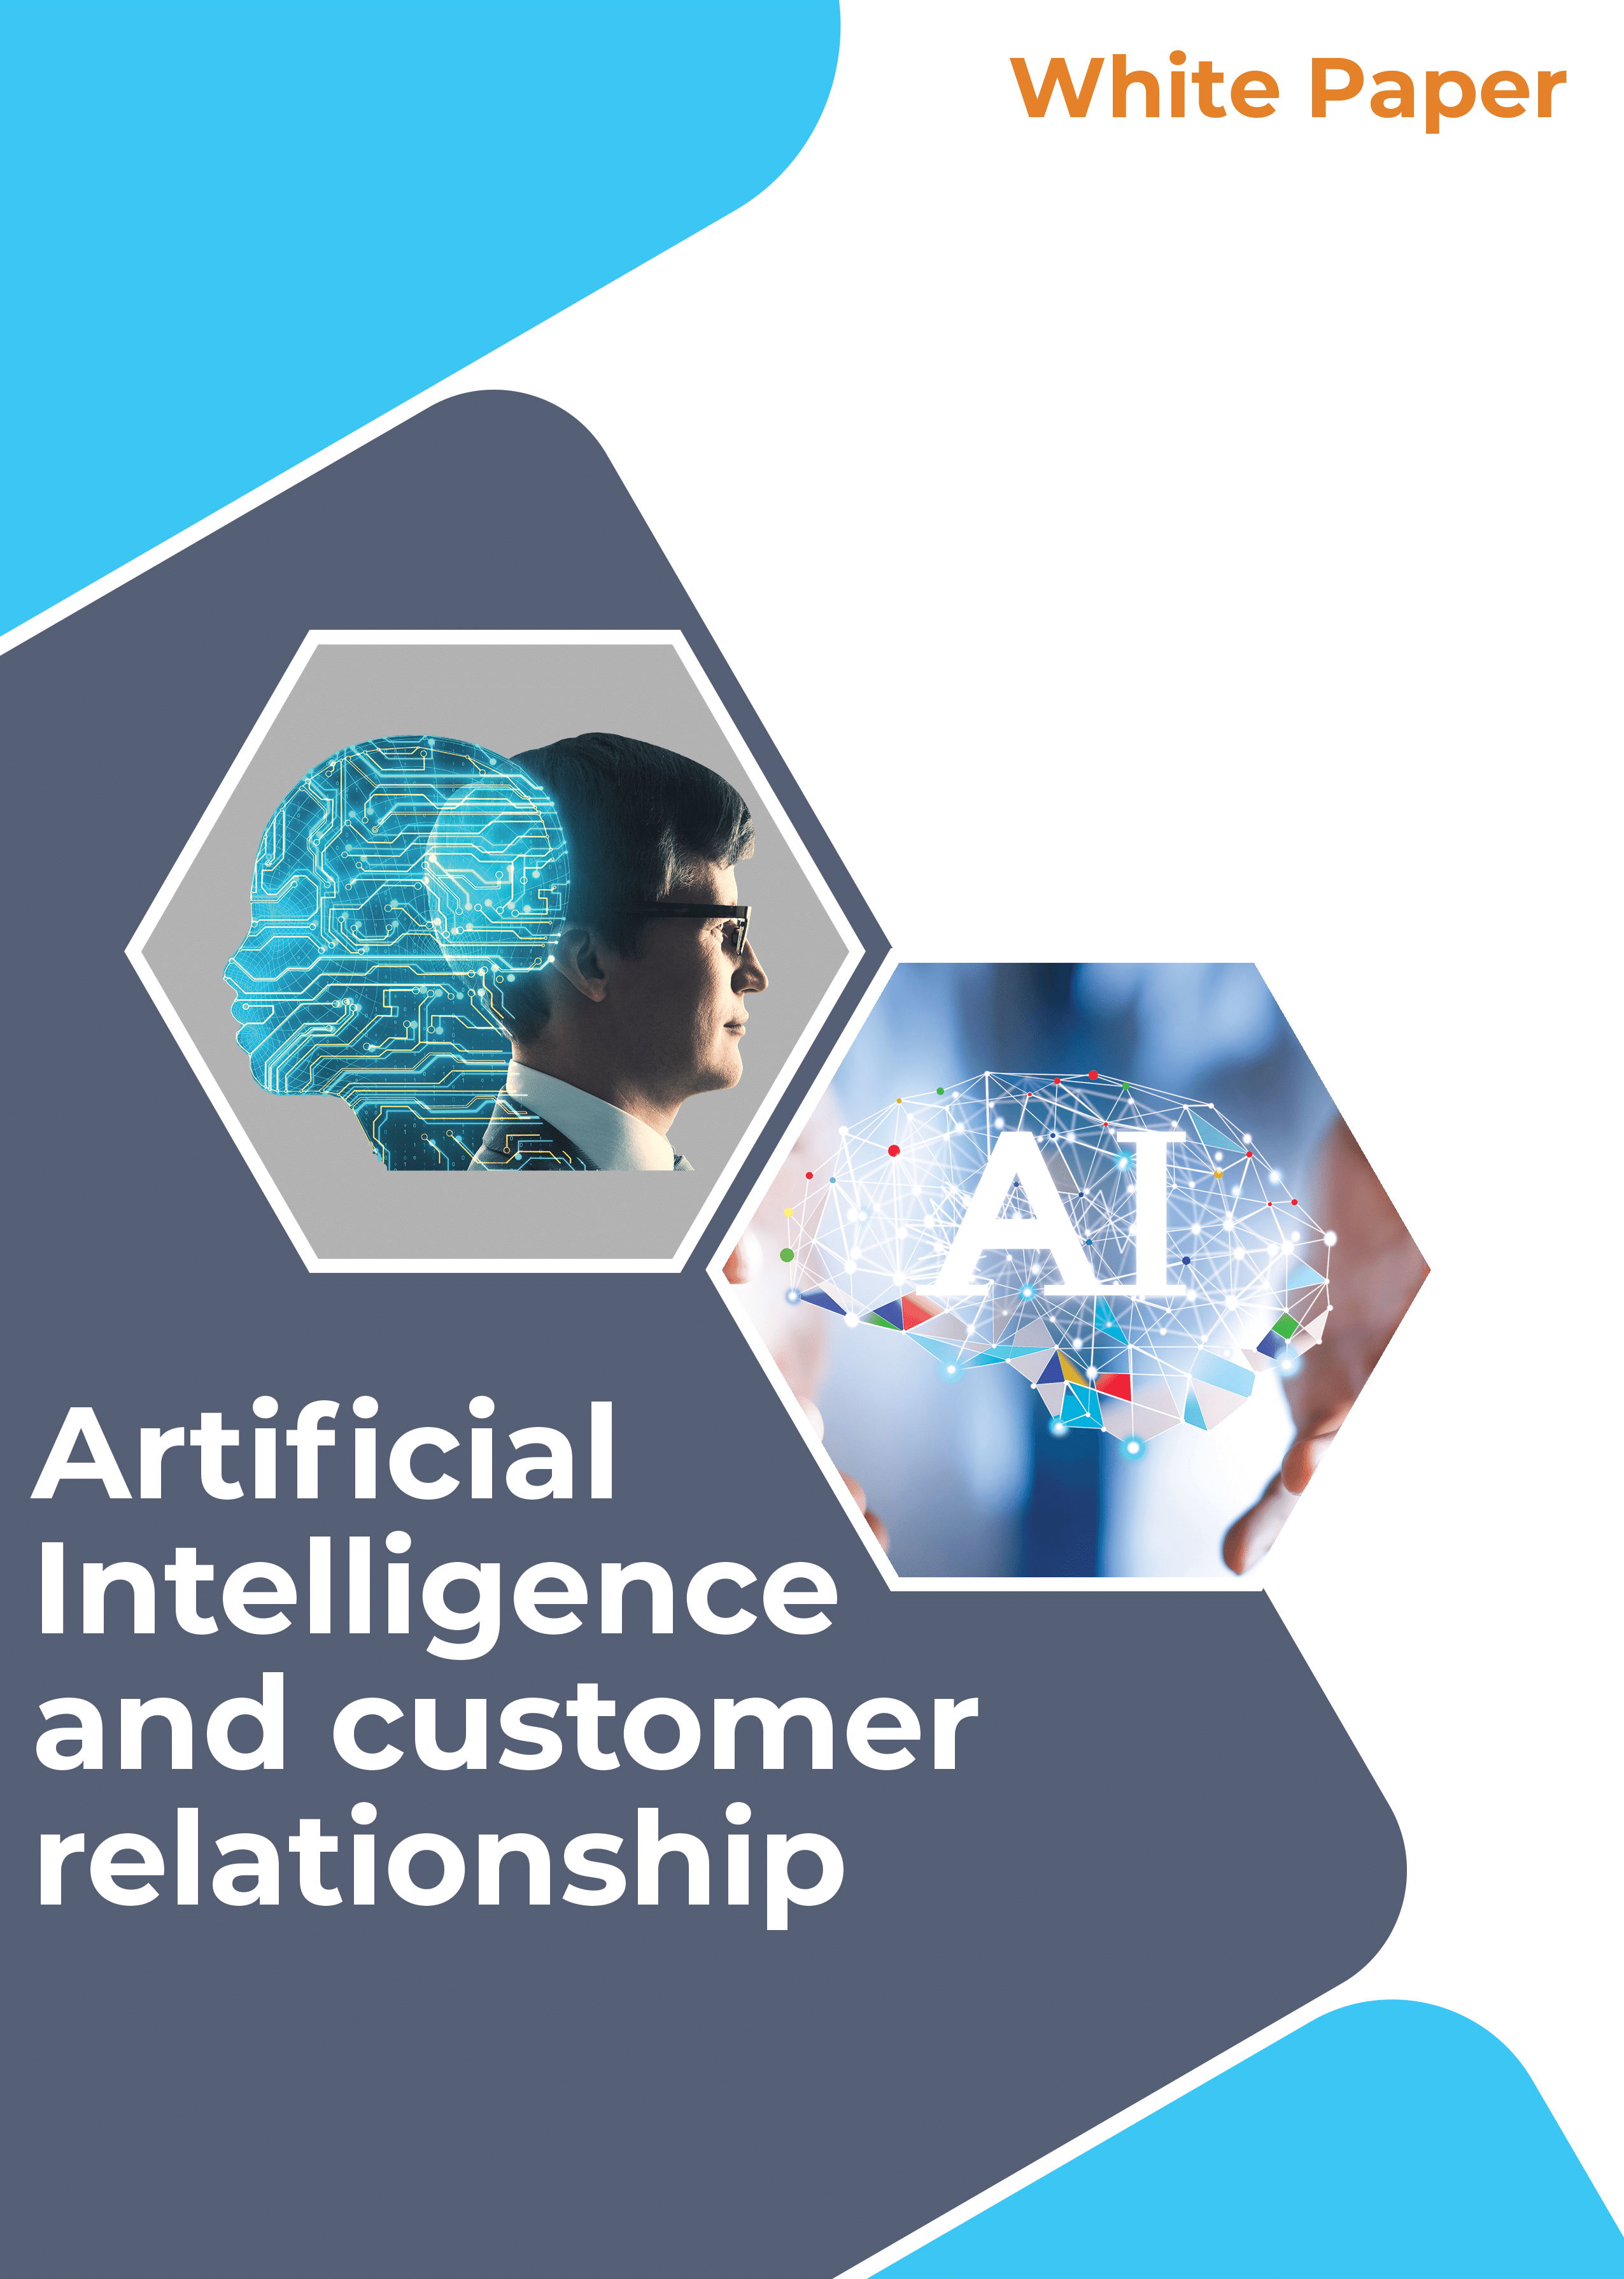 Artificial intelligence and customer relationship in contact center